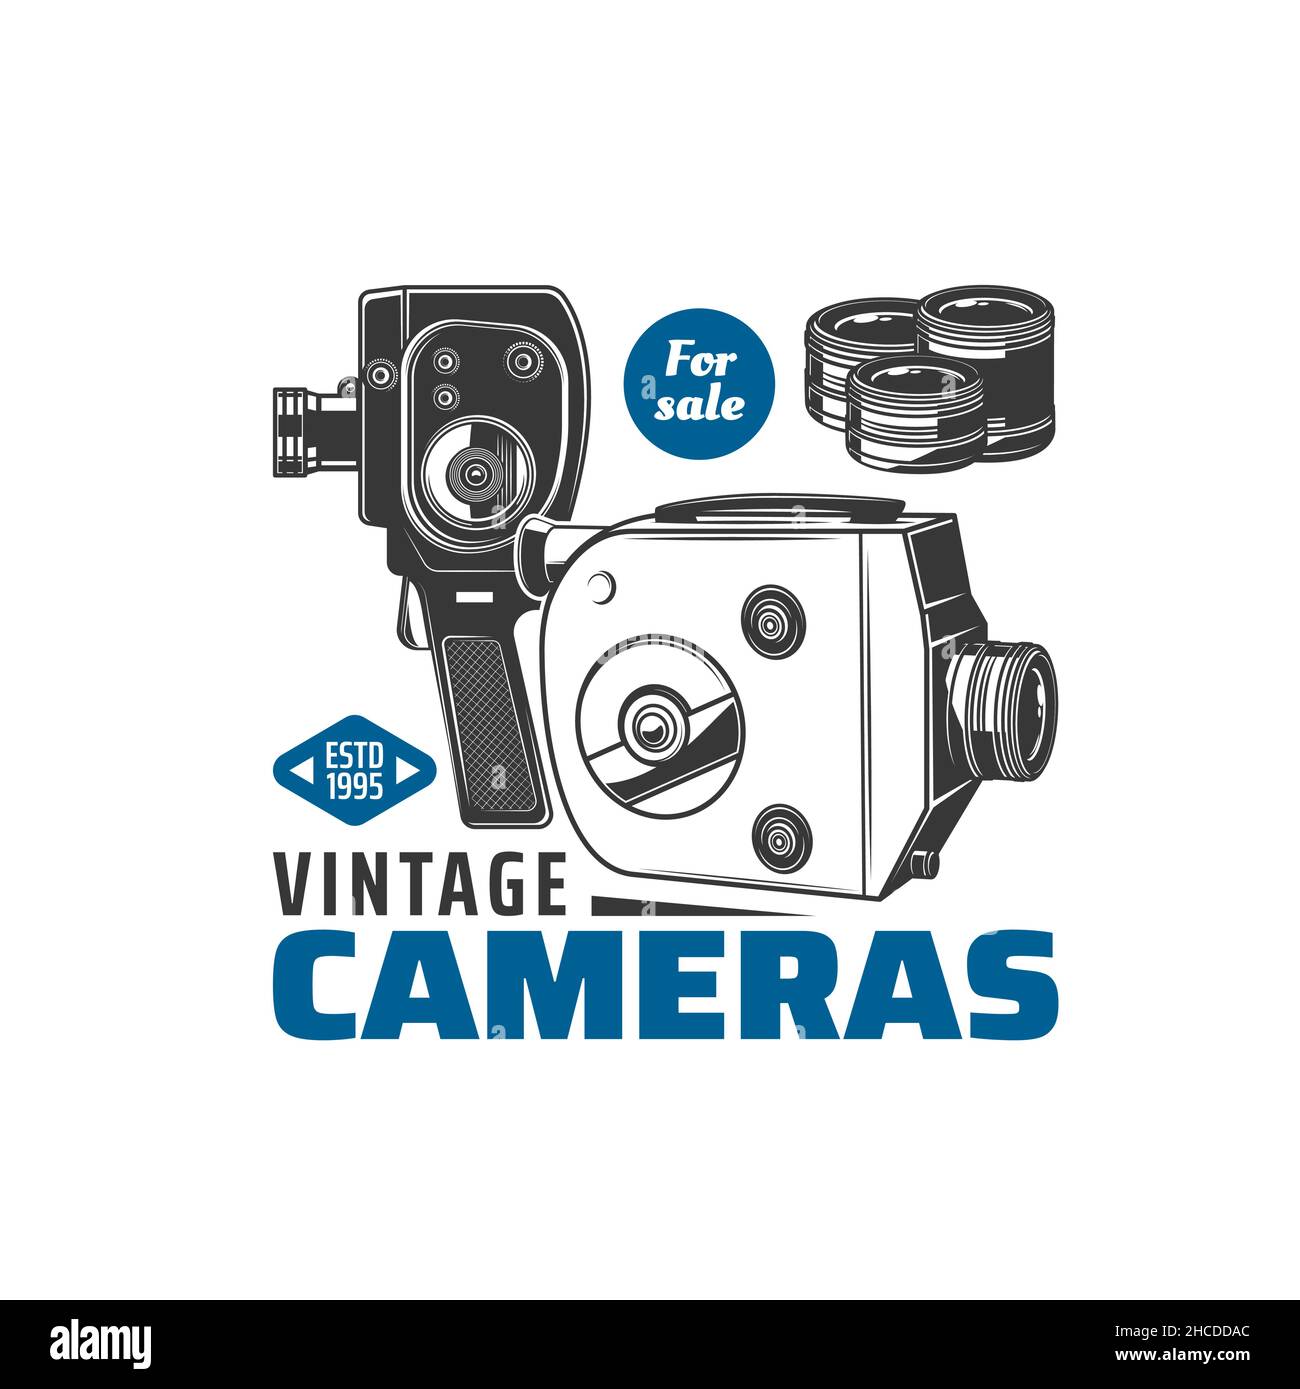 Vintage cameras icon. Retro film movie cameras, lenses and accessories shop or repair service monochrome vector emblem or icon with 60s small home cin Stock Vector